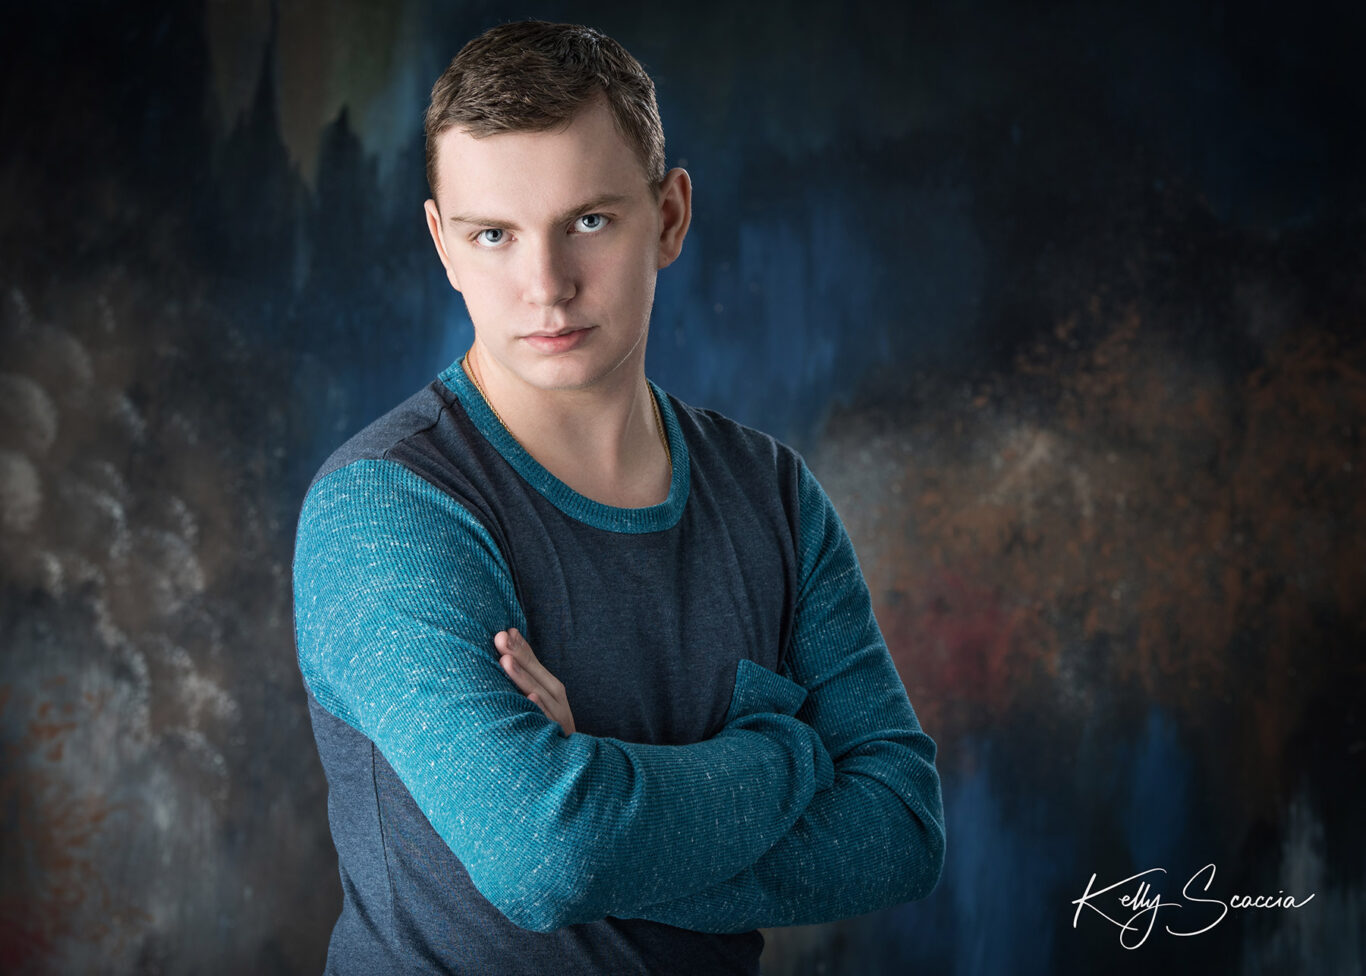 High School senior guy in the studio with a serious expression